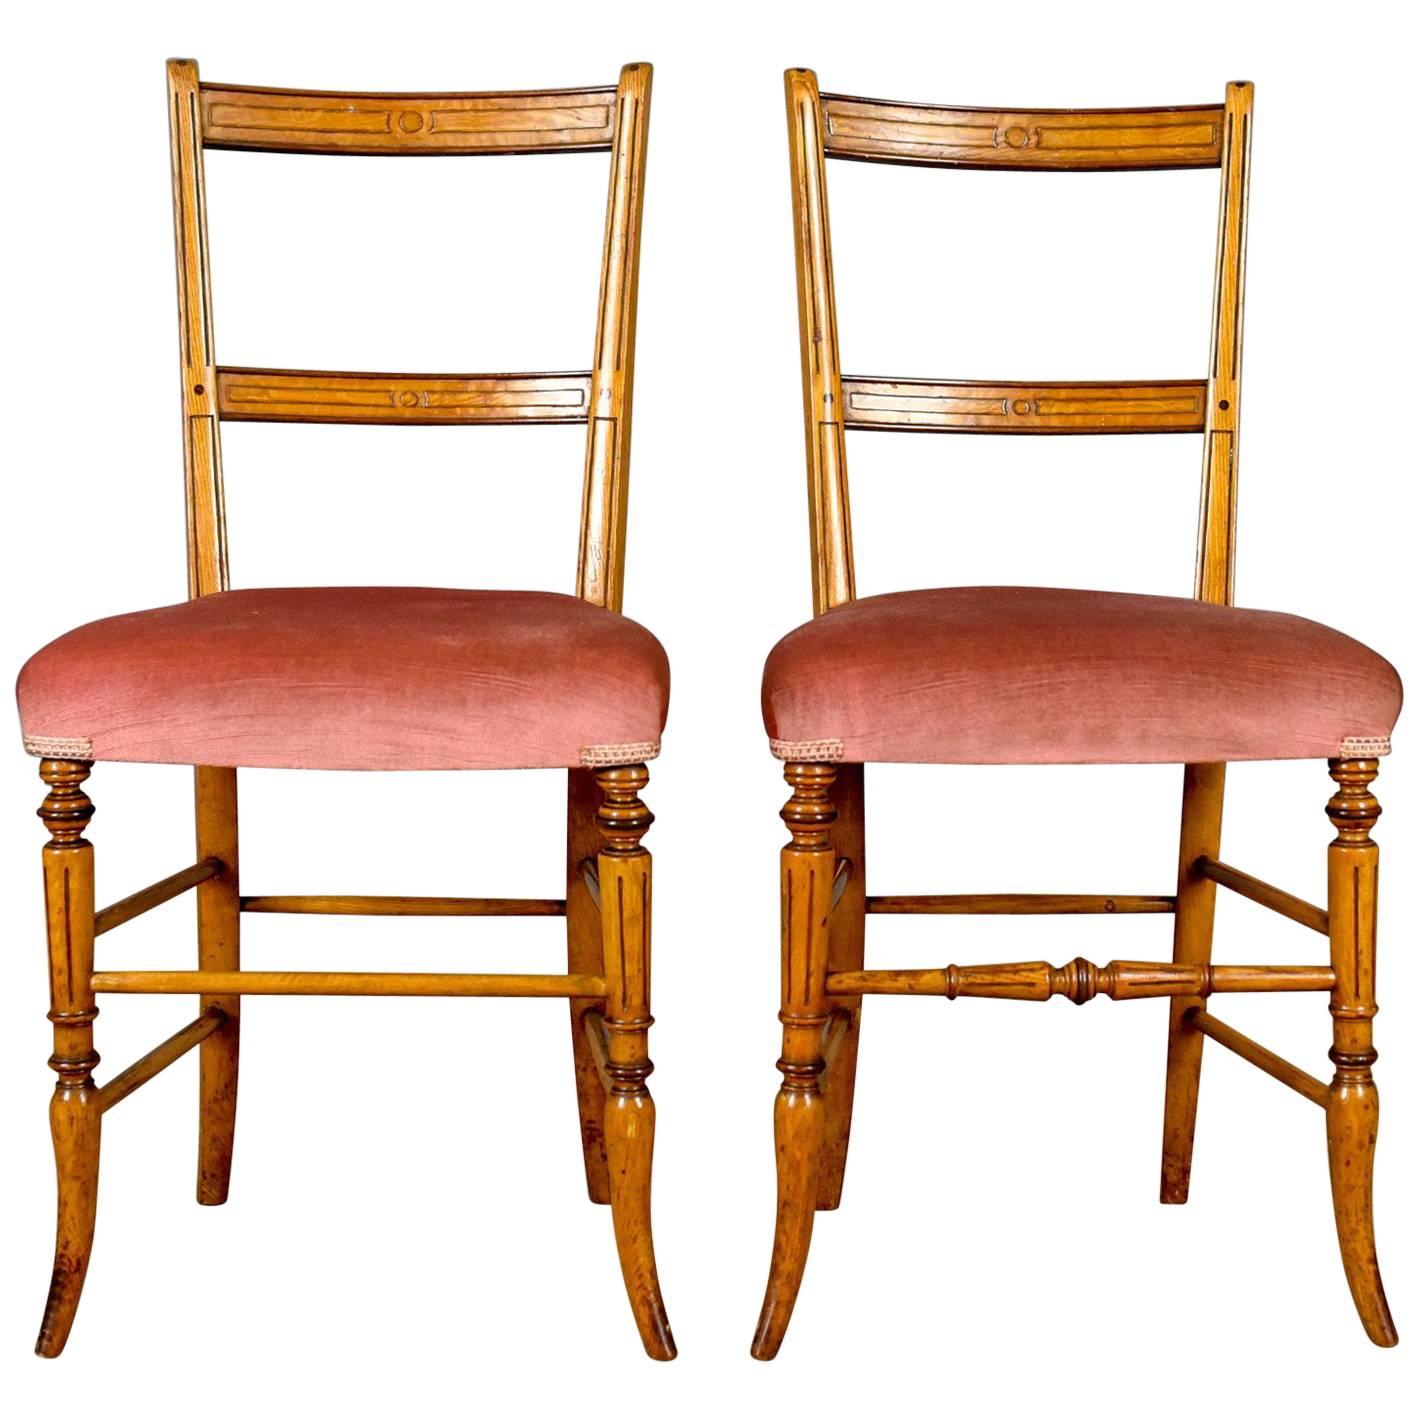 Pair of Antique Chairs, Upholstered, Victorian, English Walnut, Side, circa 1880